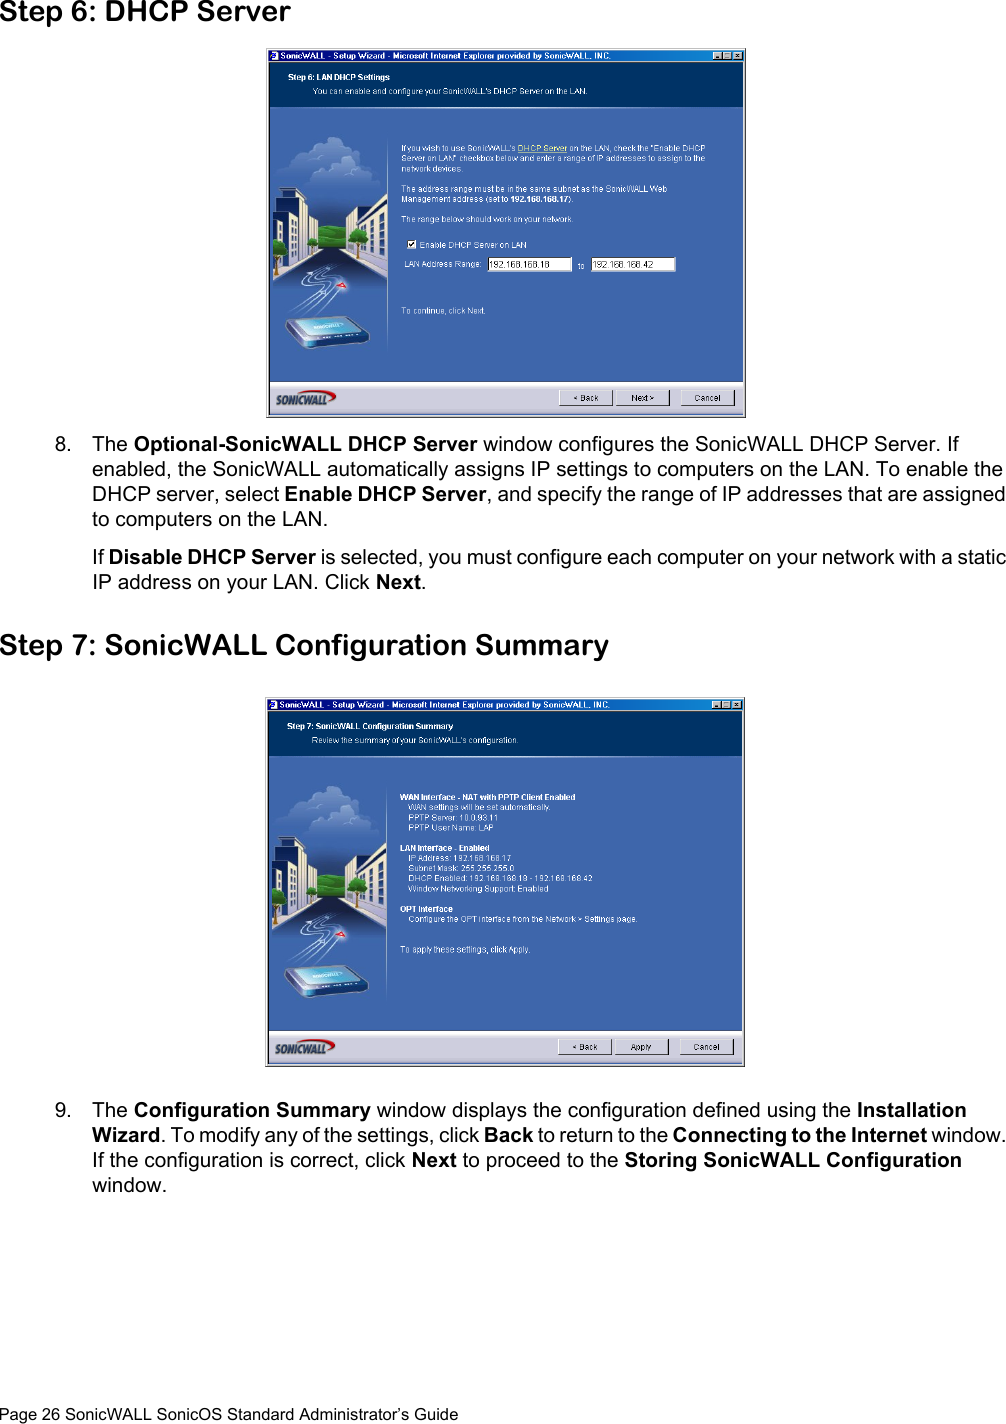 Page 26 SonicWALL SonicOS Standard Administrator’s GuideStep 6: DHCP Server8. The Optional-SonicWALL DHCP Server window configures the SonicWALL DHCP Server. If enabled, the SonicWALL automatically assigns IP settings to computers on the LAN. To enable the DHCP server, select Enable DHCP Server, and specify the range of IP addresses that are assigned to computers on the LAN. If Disable DHCP Server is selected, you must configure each computer on your network with a static IP address on your LAN. Click Next.Step 7: SonicWALL Configuration Summary9. The Configuration Summary window displays the configuration defined using the Installation Wizard. To modify any of the settings, click Back to return to the Connecting to the Internet window. If the configuration is correct, click Next to proceed to the Storing SonicWALL Configuration window. 